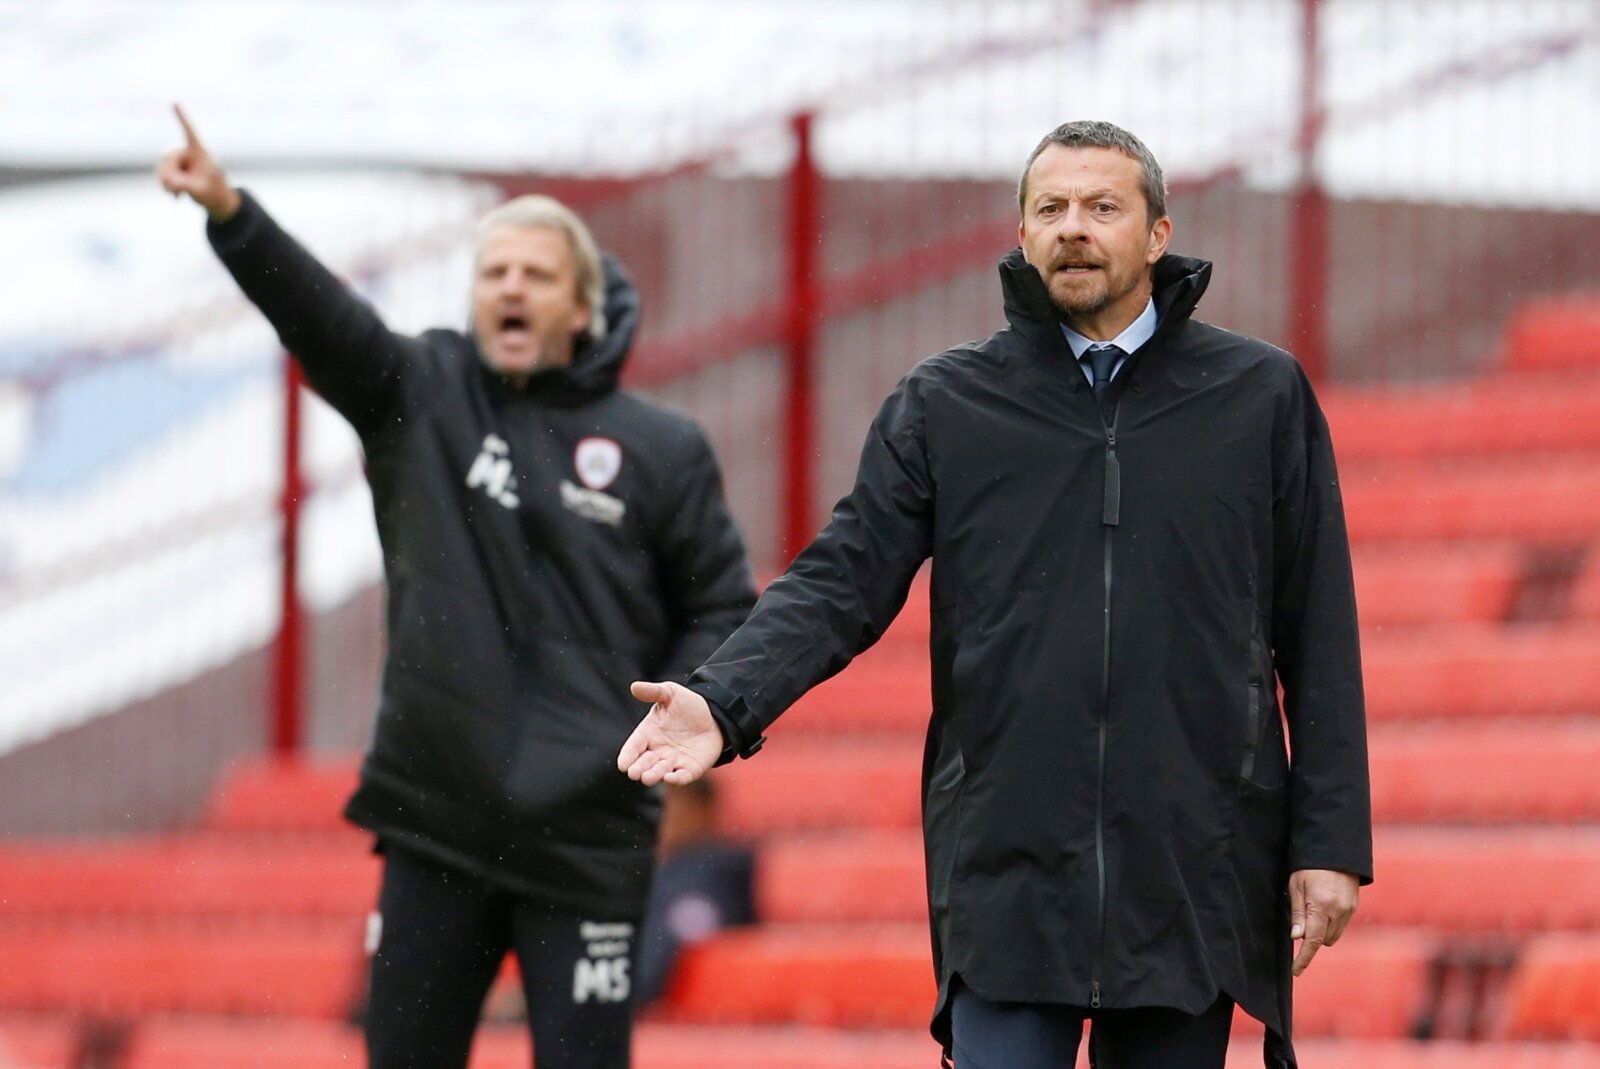 Soccer Football - Championship - Barnsley v Sheffield United - Oakwell, Barnsley, Britain - October 24, 2021 Sheffield United manager Slavisa Jokanovic and Barnsley manager Markus Schopp  Action Images/Ed Sykes  EDITORIAL USE ONLY. No use with unauthorized audio, video, data, fixture lists, club/league logos or 